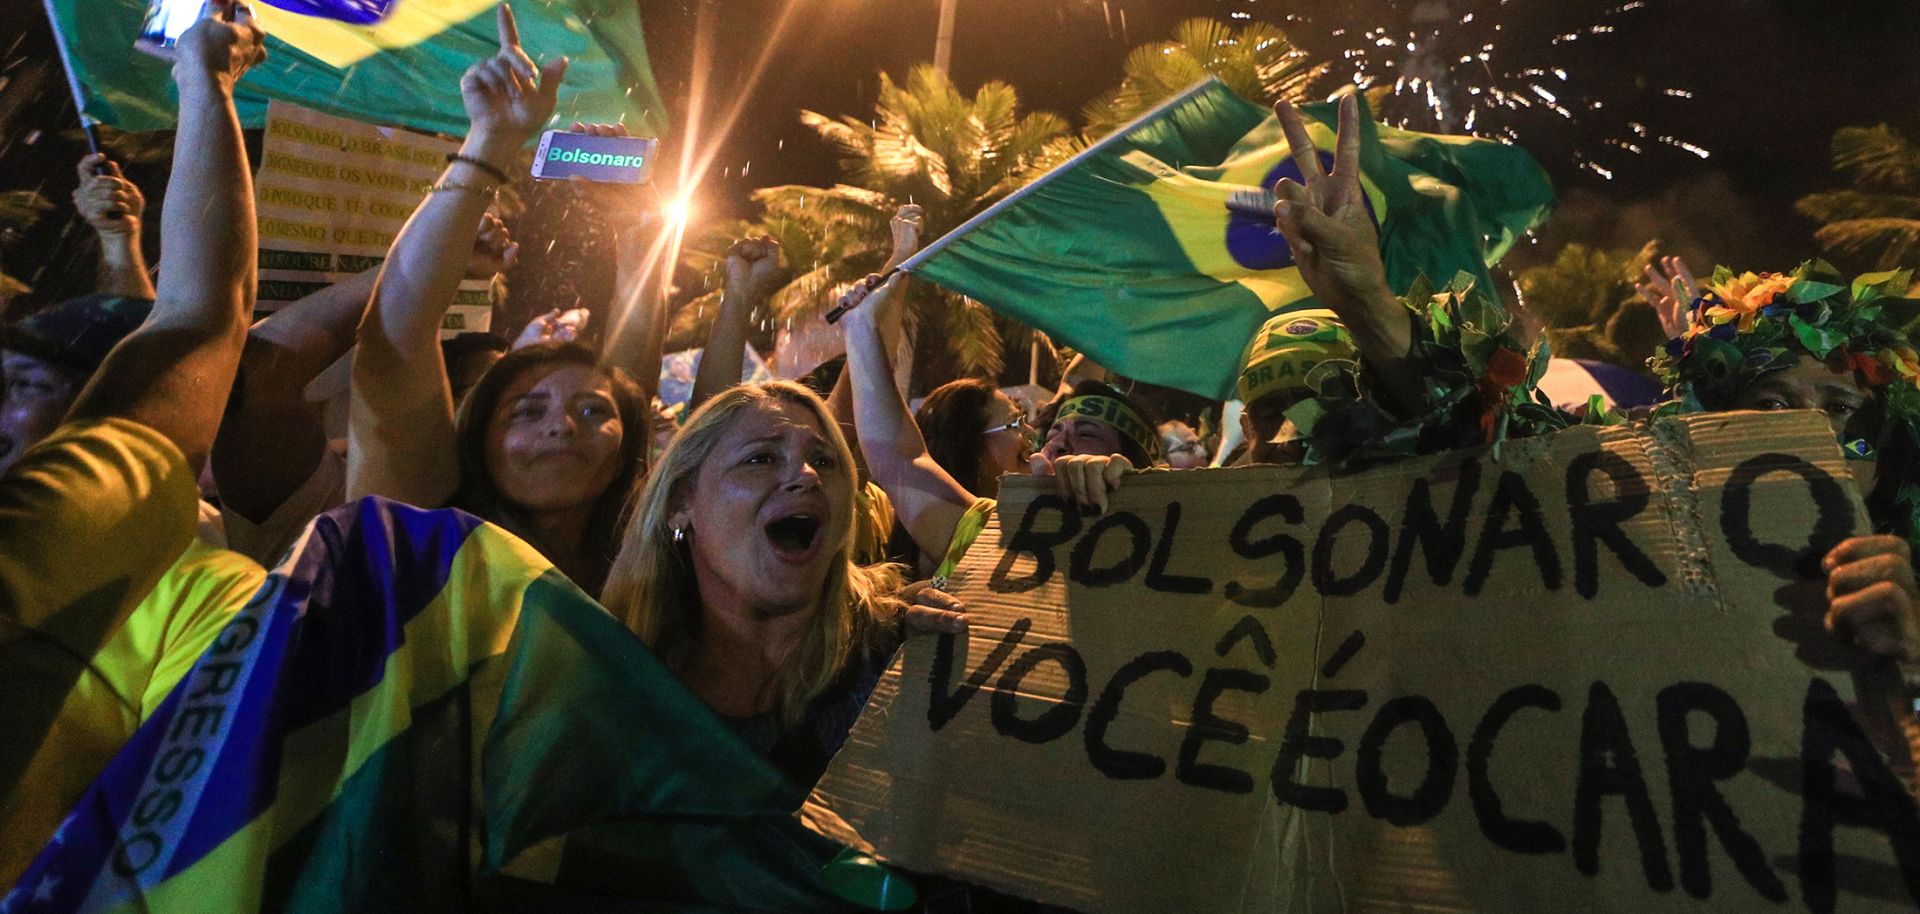 Brazilian supporters of populist candidate Jair Bolsonaro celebrate his presidential victory on Oct. 28.